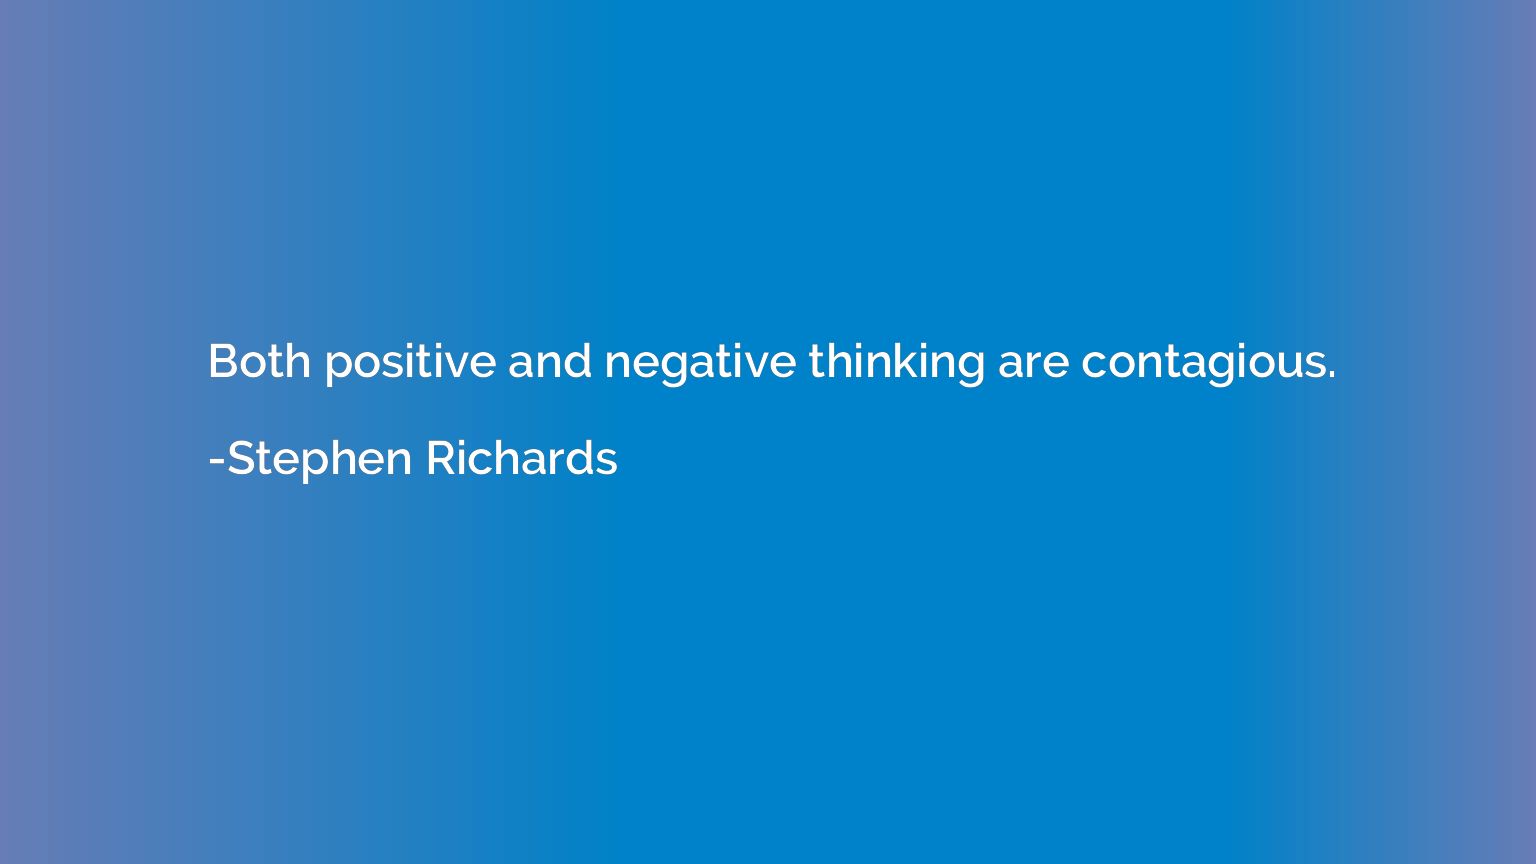 Both positive and negative thinking are contagious.